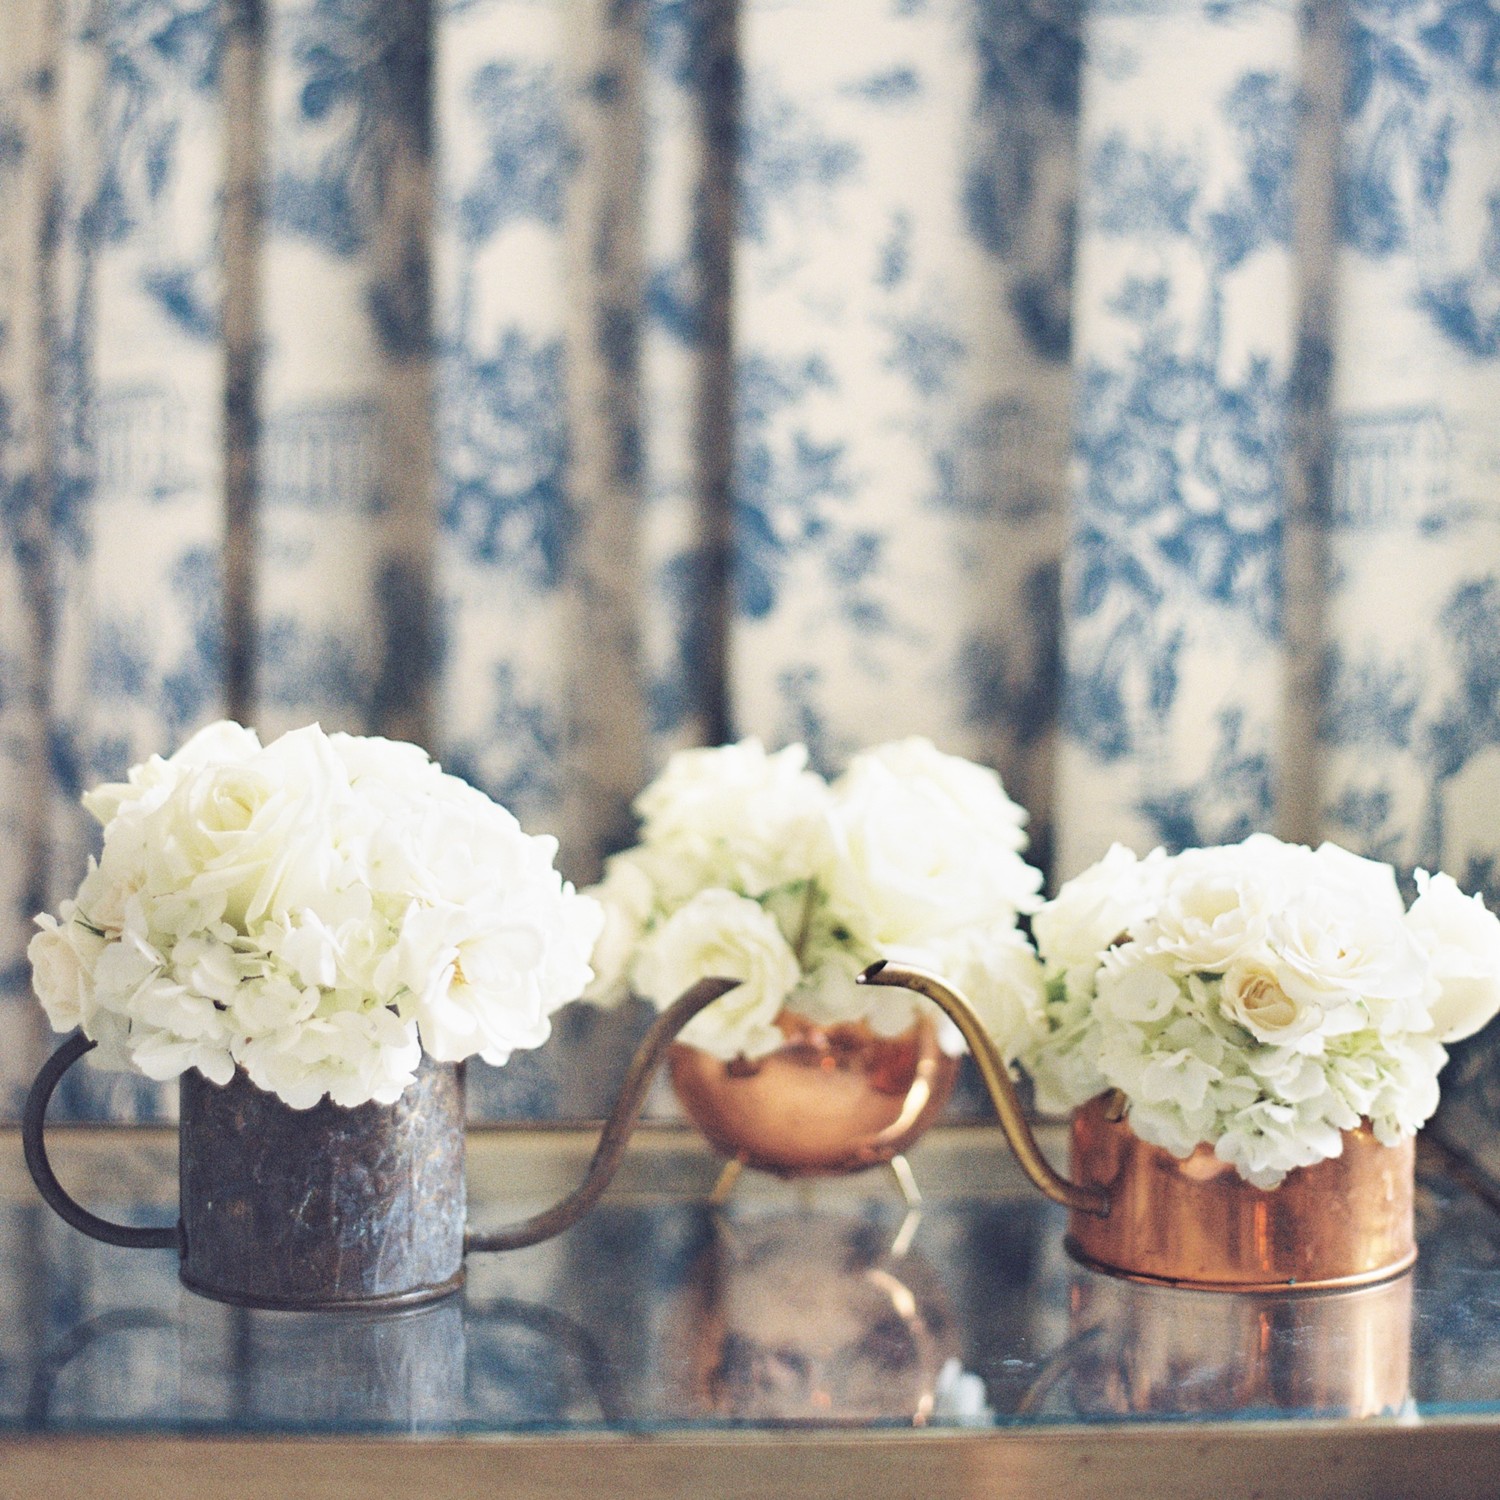 Antique copper watering cans overflow with bridesmaids bouquets of white roses and hydrangeas.